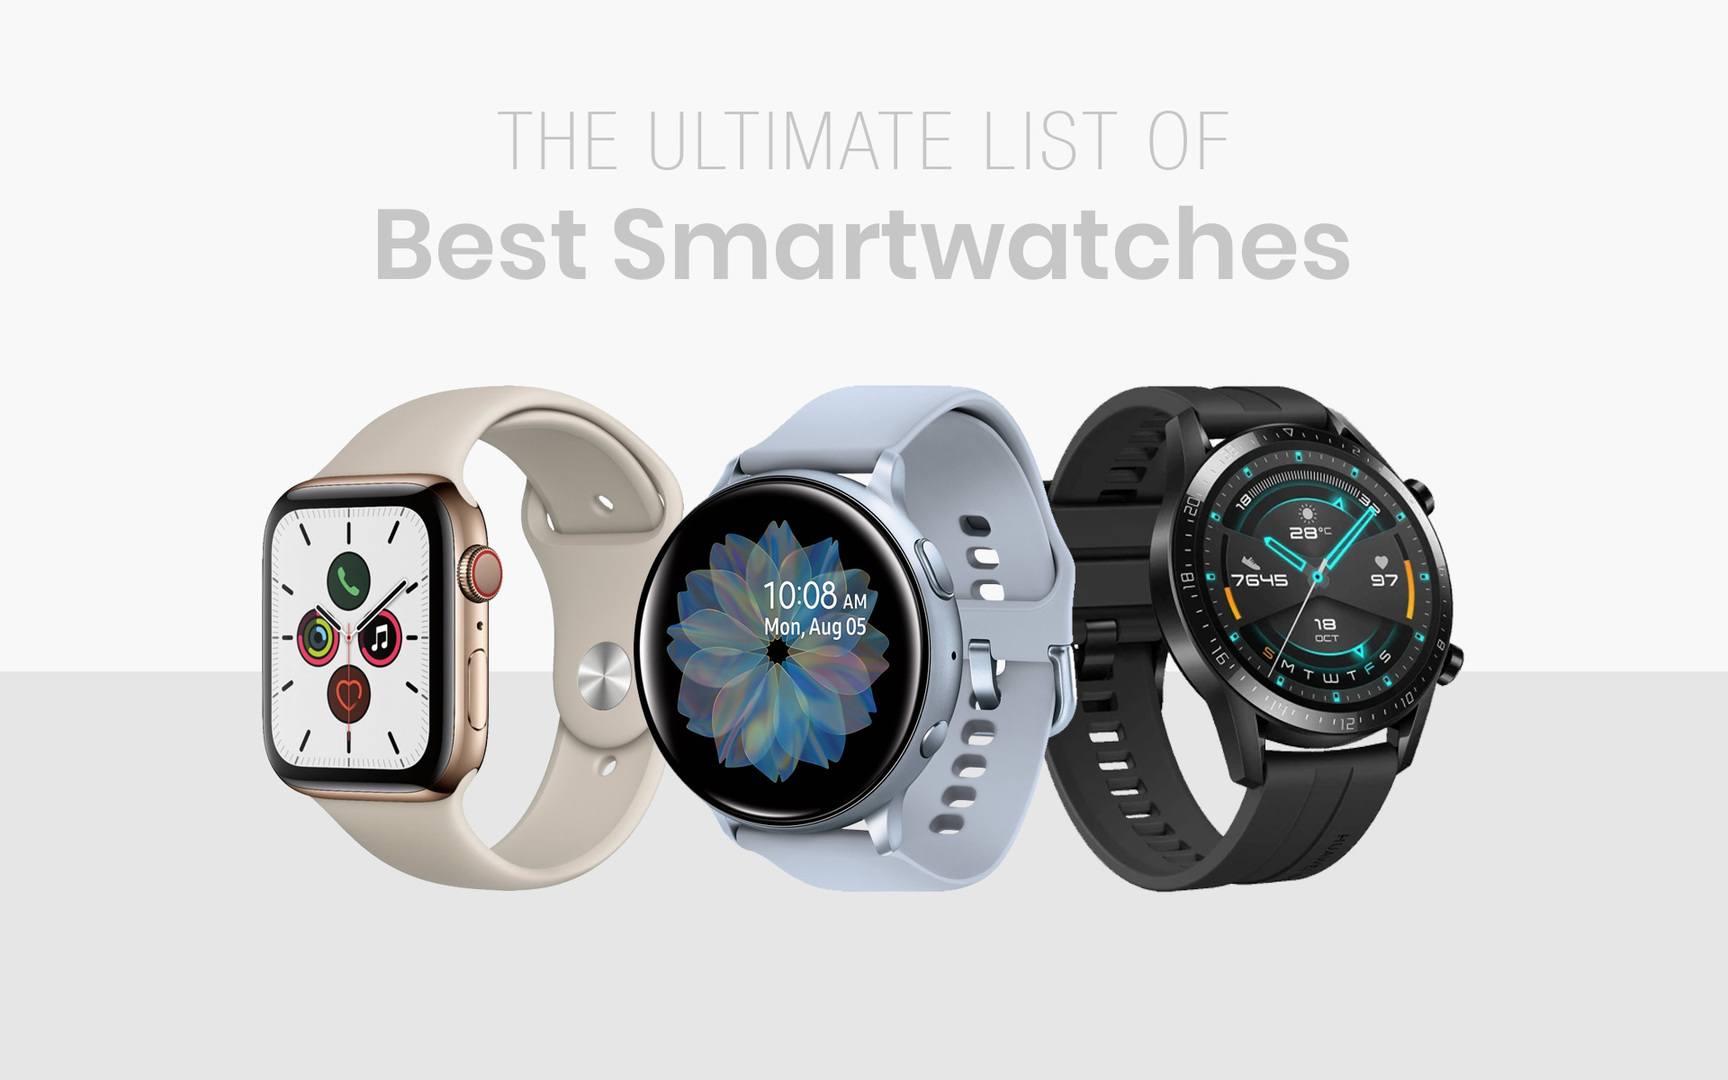 Best Smartwatches-The Ultimate List